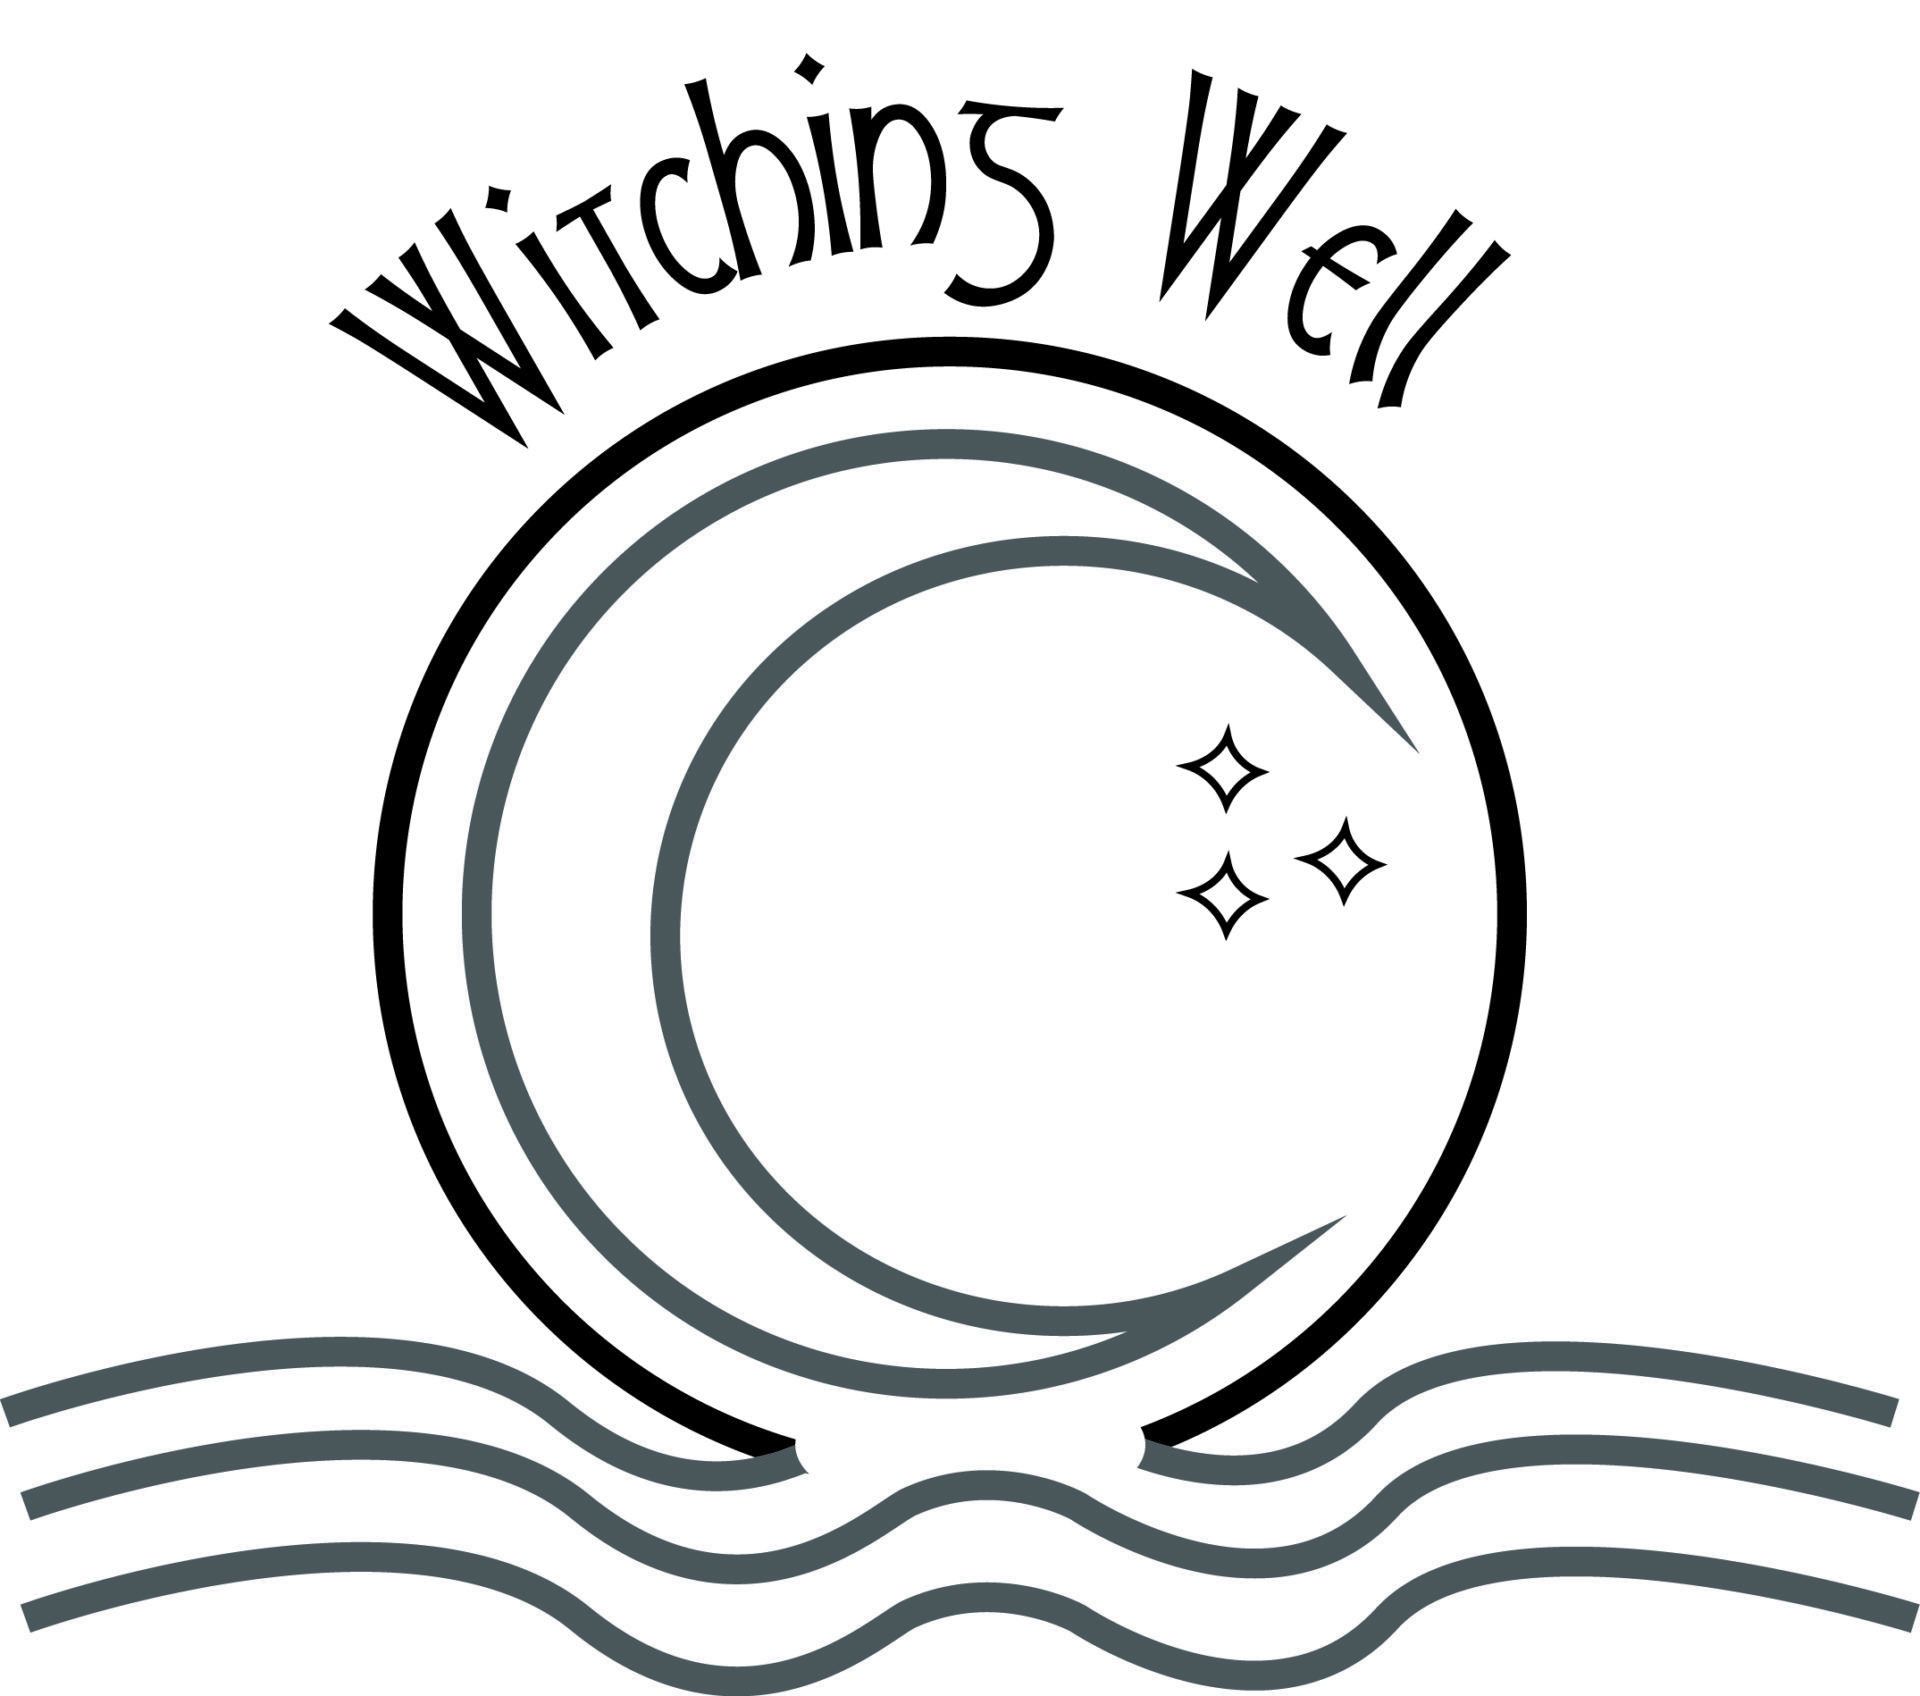 The Witching Well, Winifred Costello